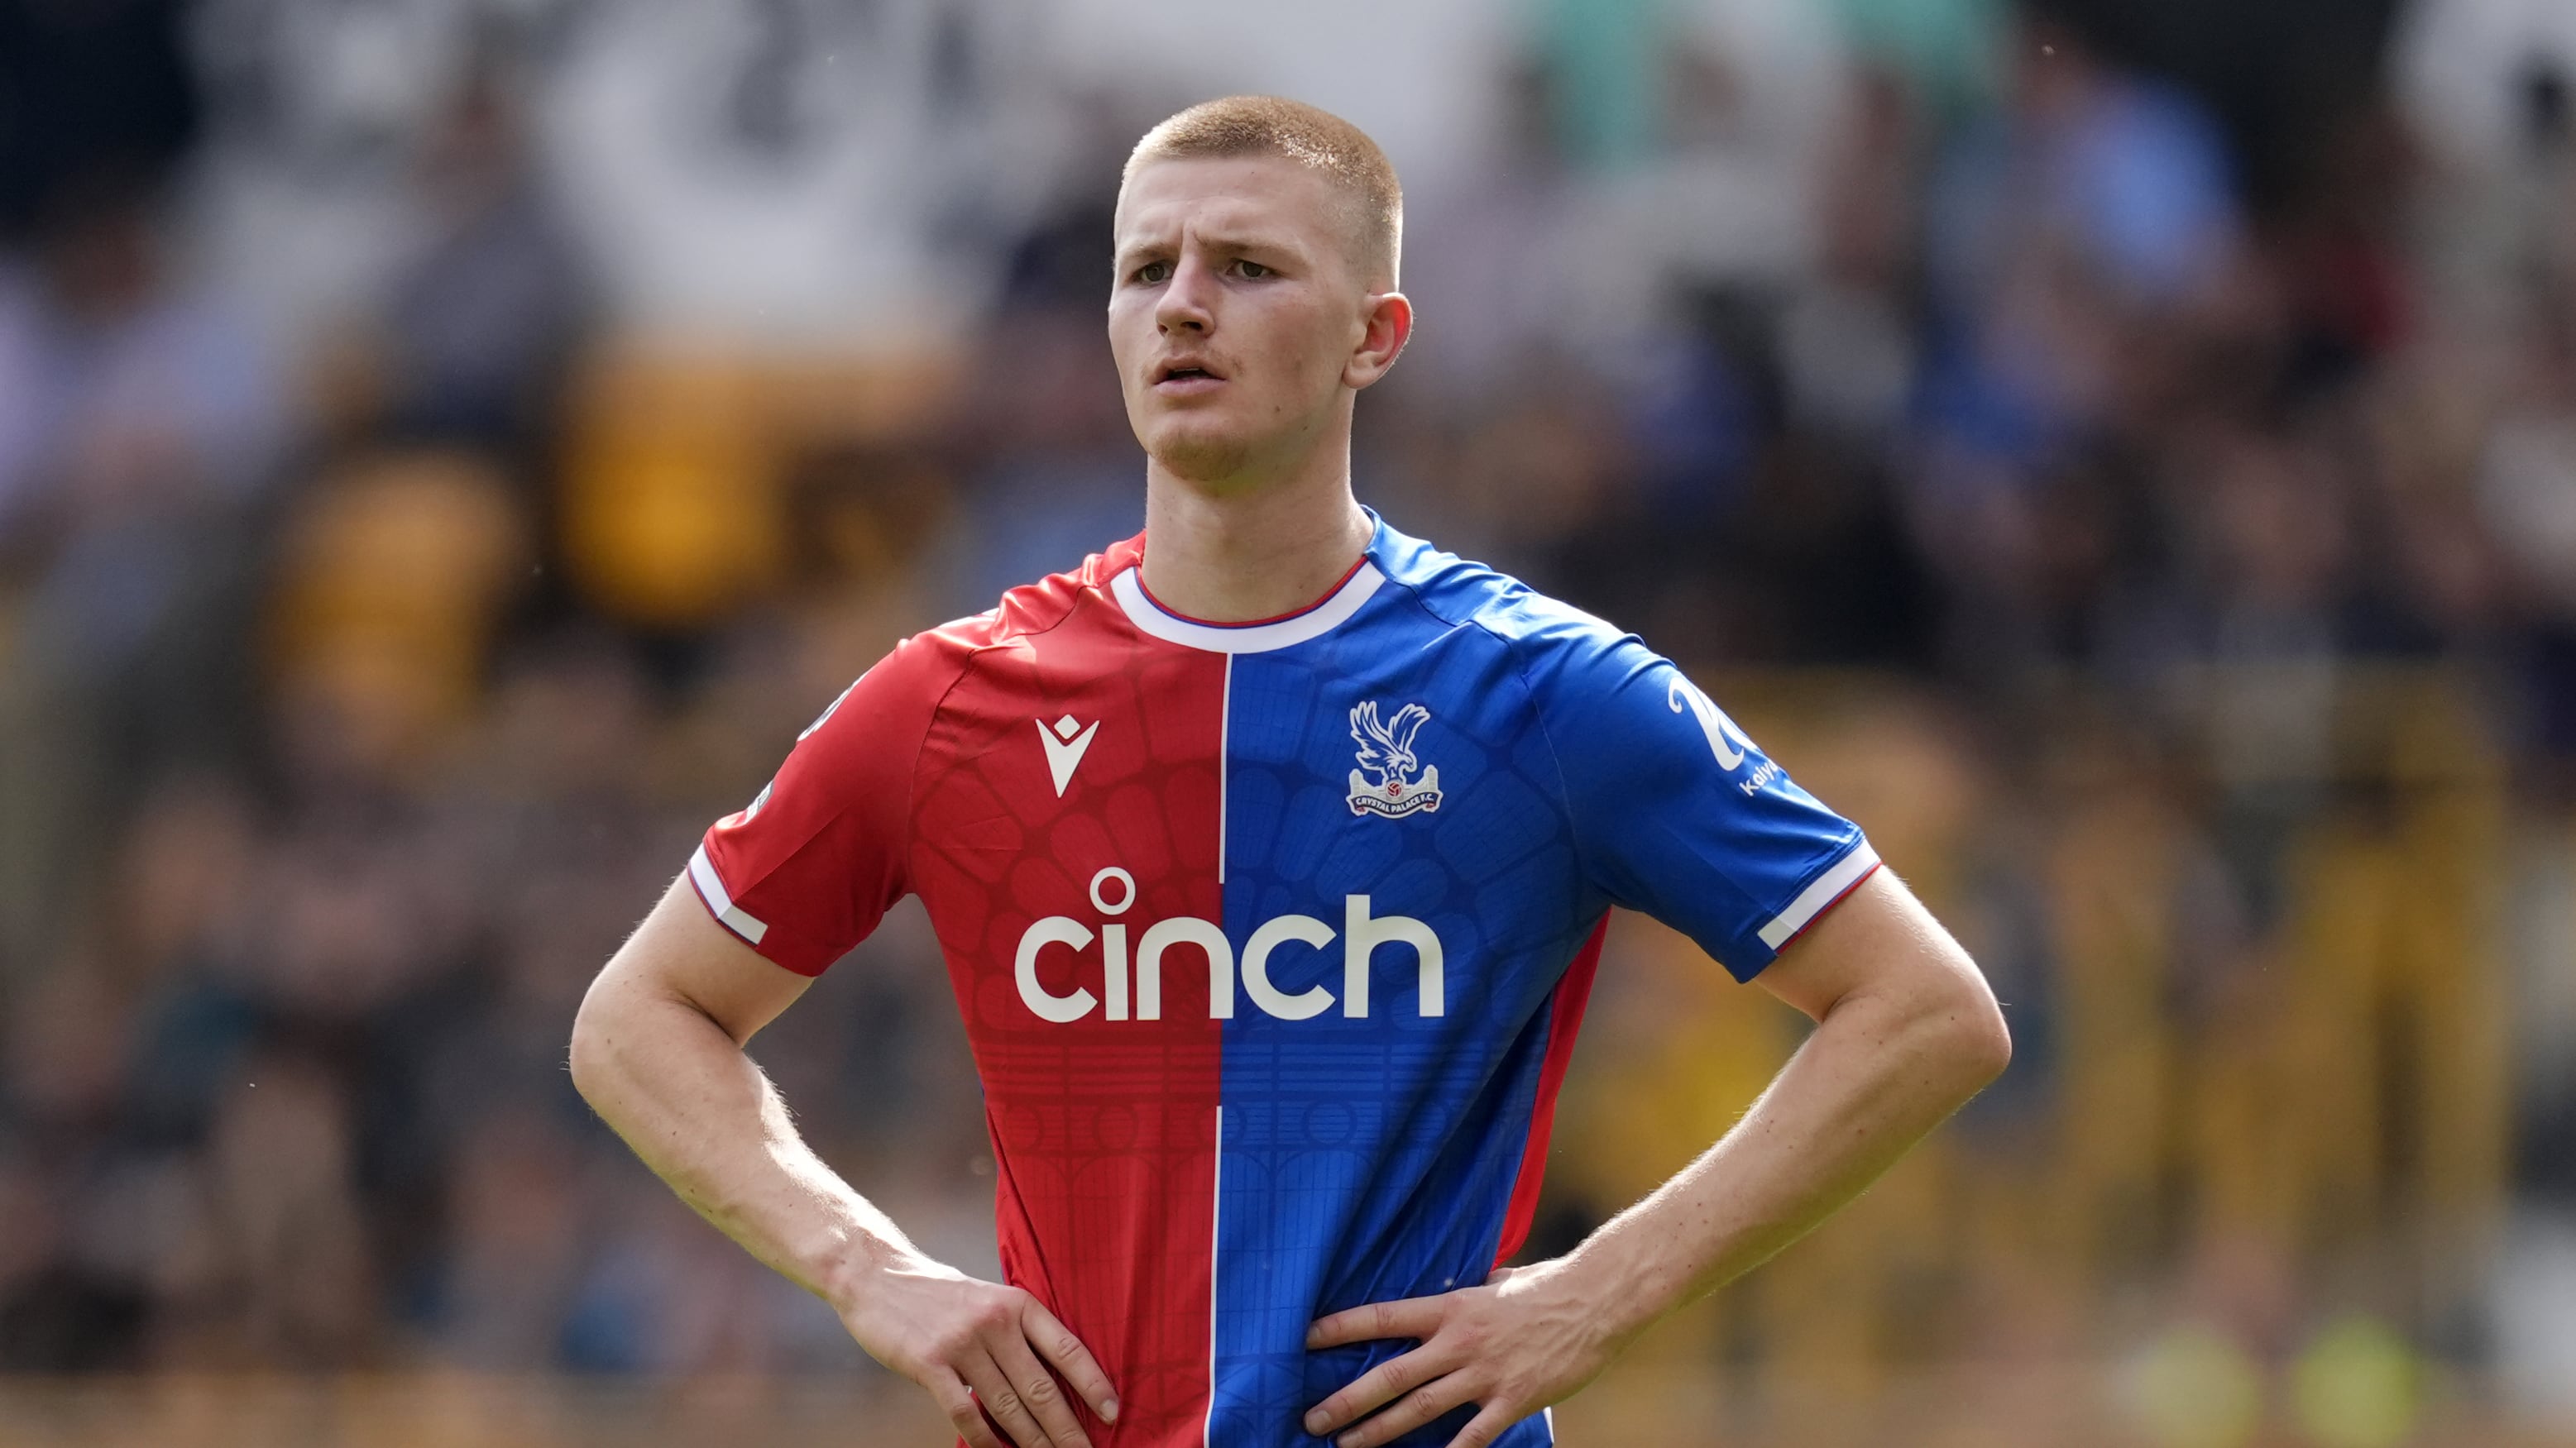 Crystal Palace midfielder Adam Wharton has adapted quickly to life in the Premier League